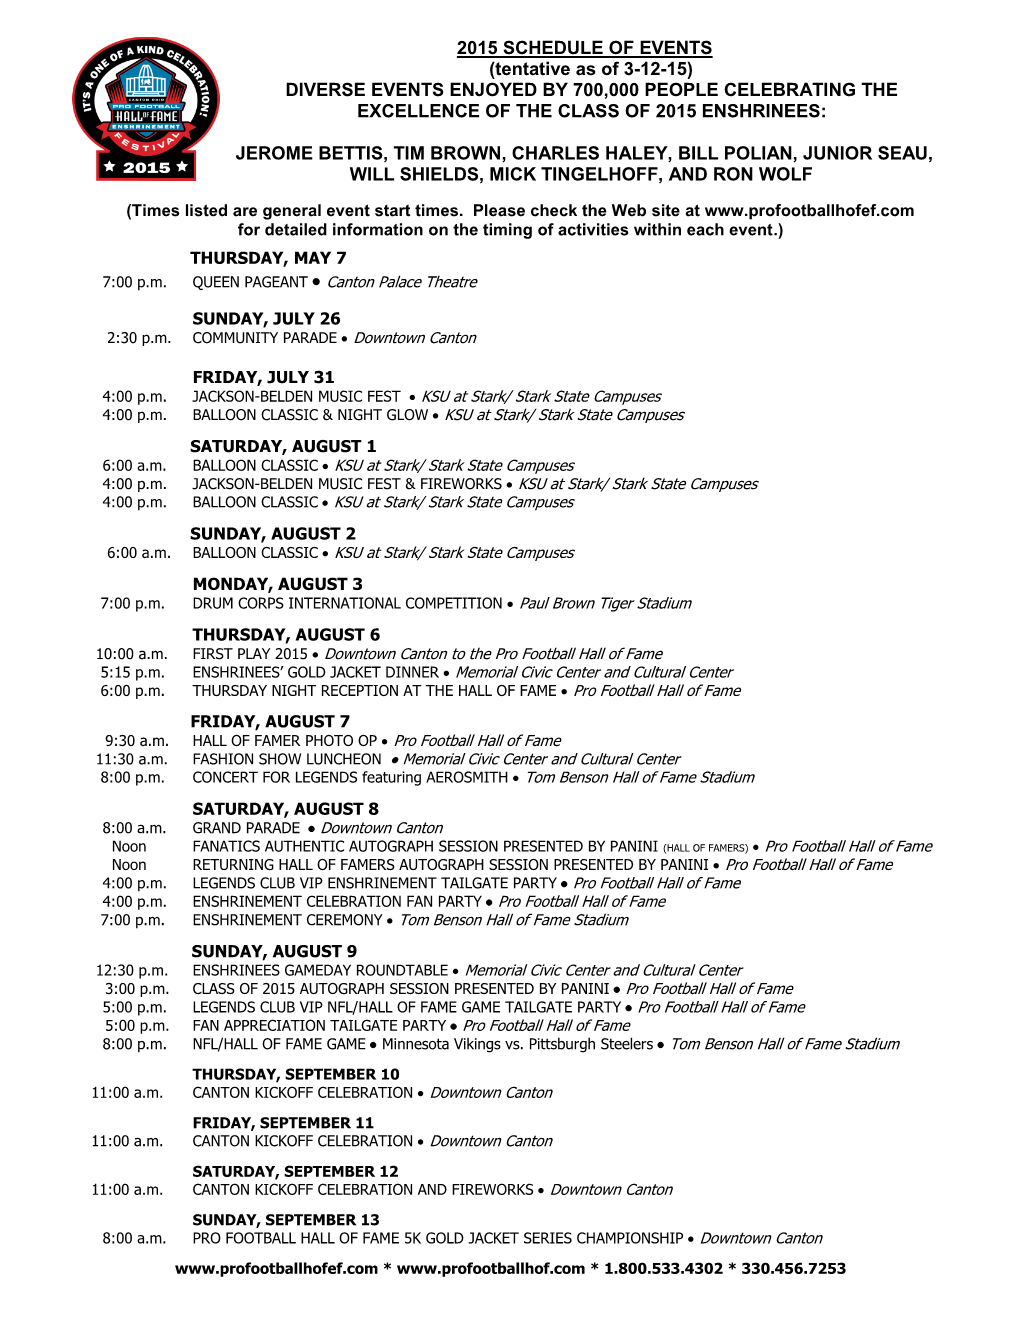 2015 SCHEDULE of EVENTS (Tentative As of 3-12-15) DIVERSE EVENTS ENJOYED by 700,000 PEOPLE CELEBRATING the EXCELLENCE of the CLASS of 2015 ENSHRINEES